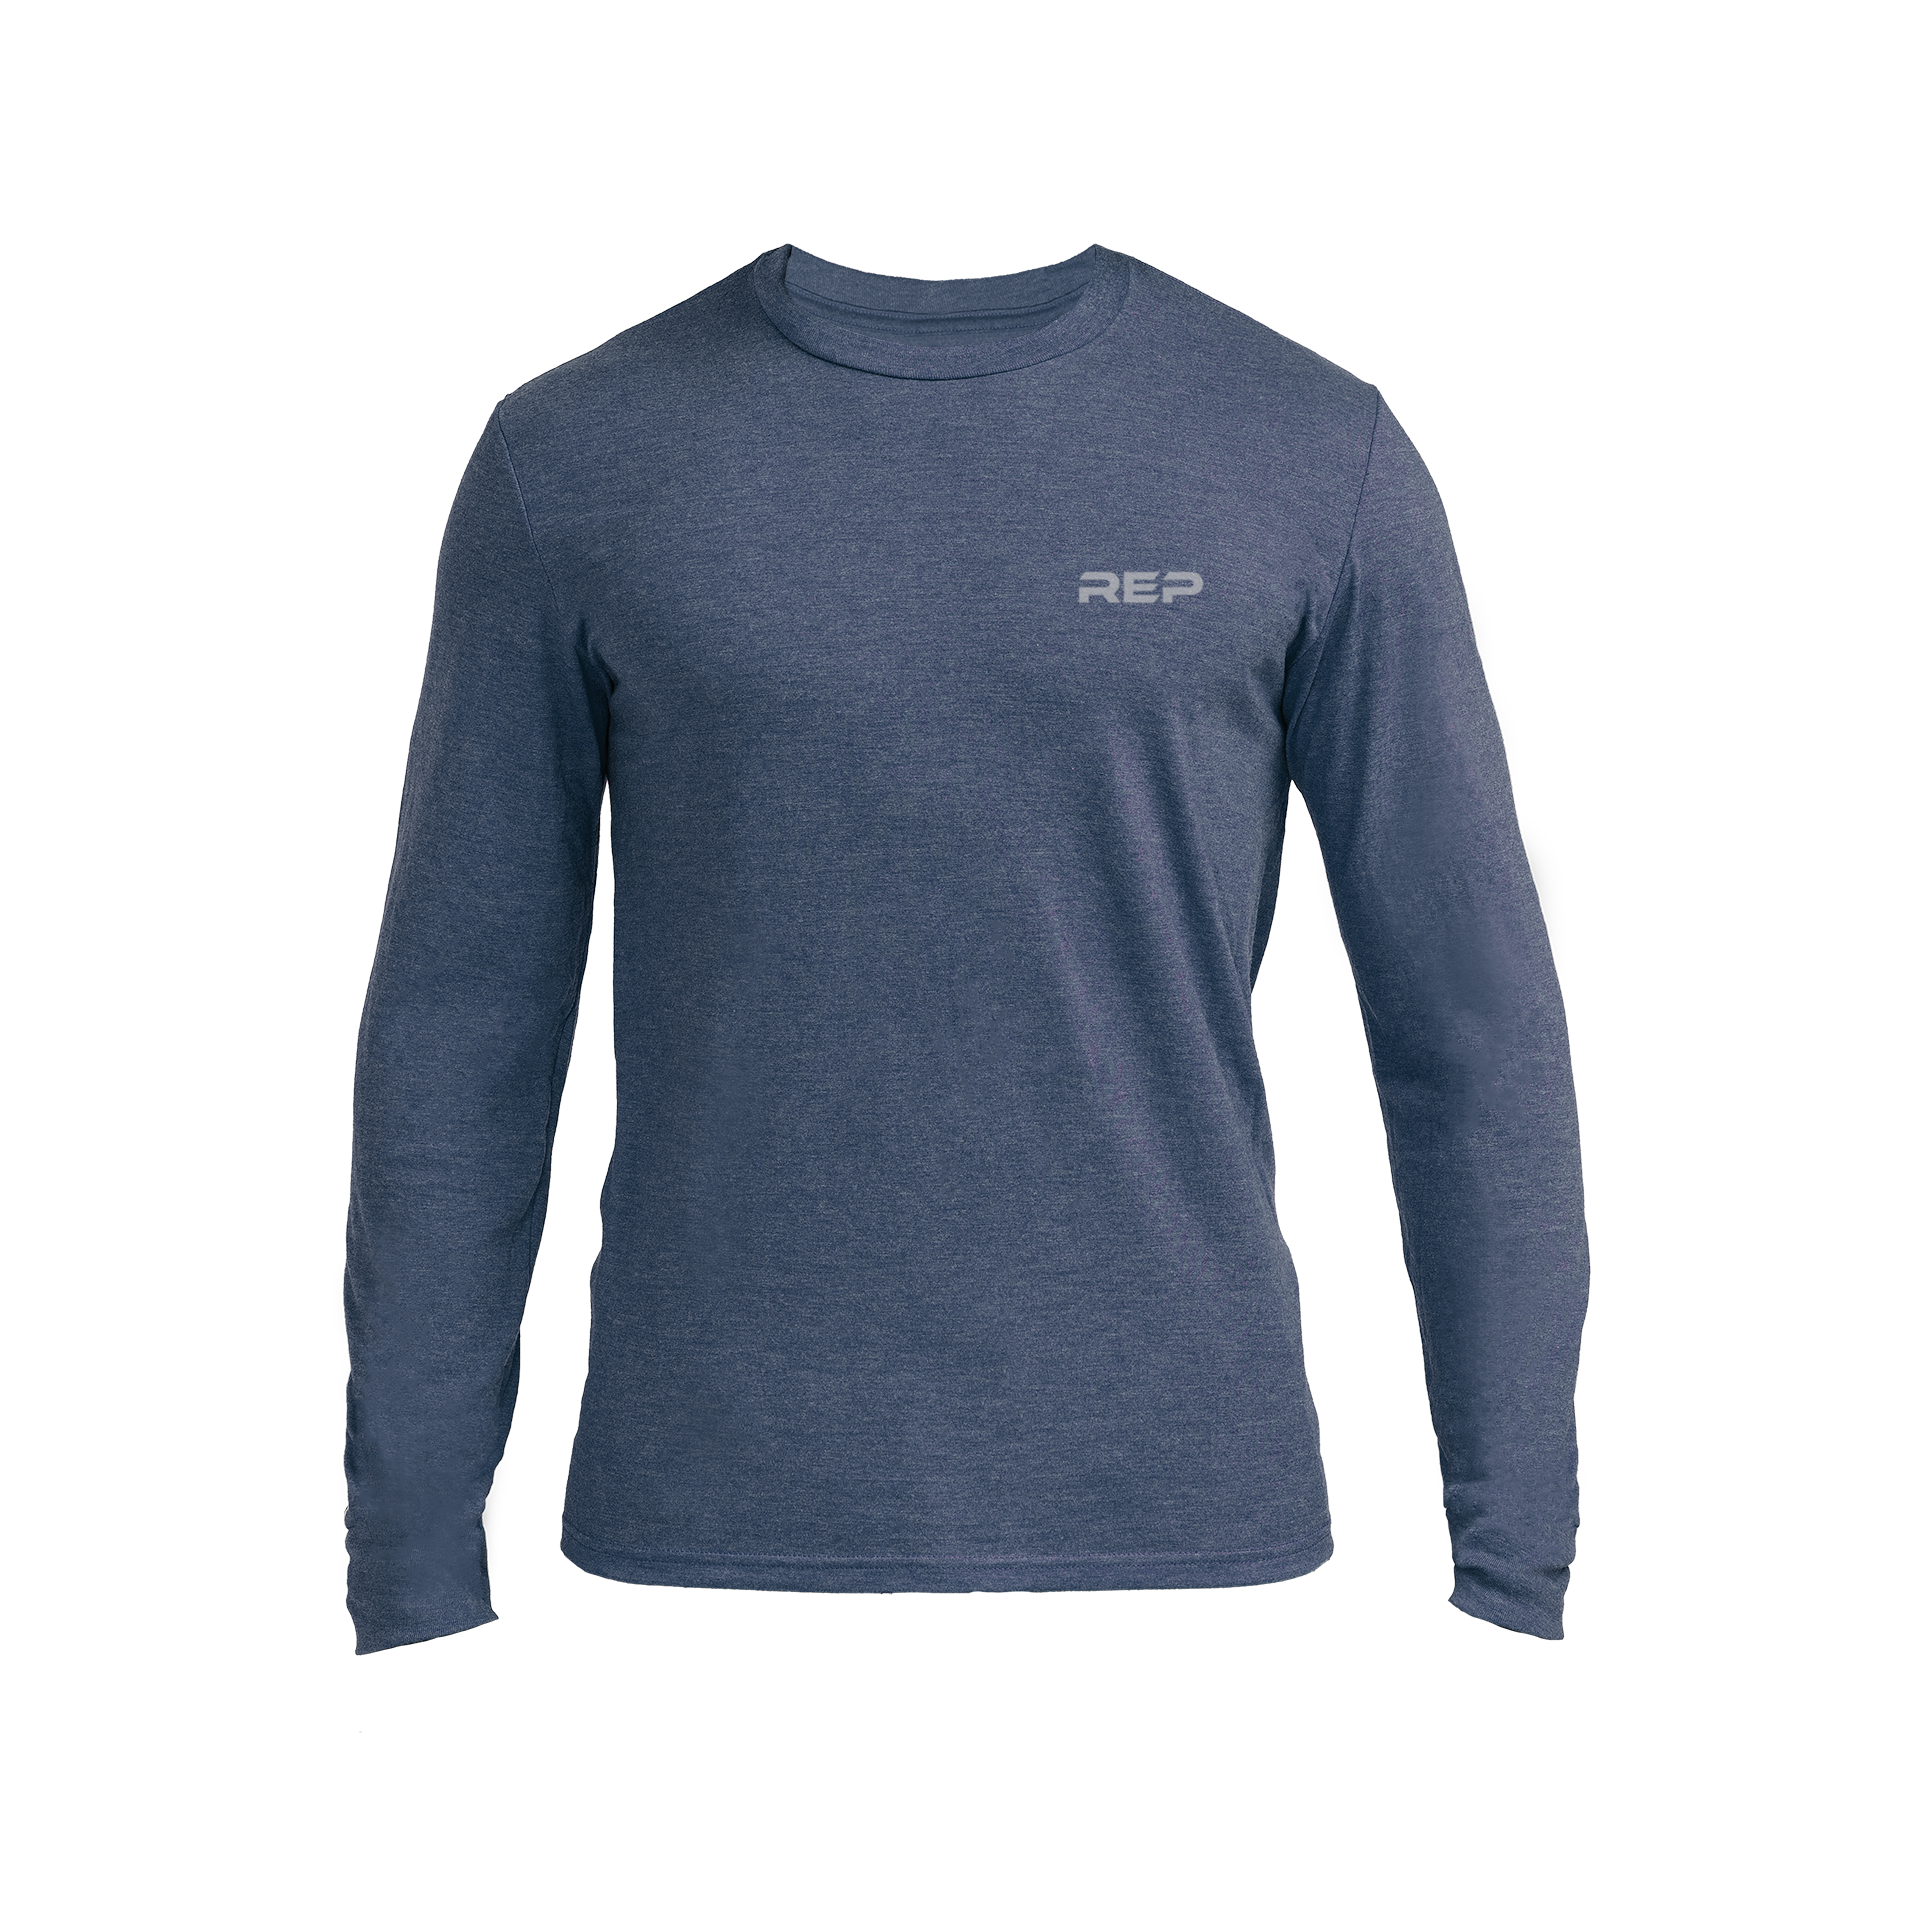 Men's REP Long-Sleeve Tri-Blend Crew - Heather Navy/Cool Gray / X-Small